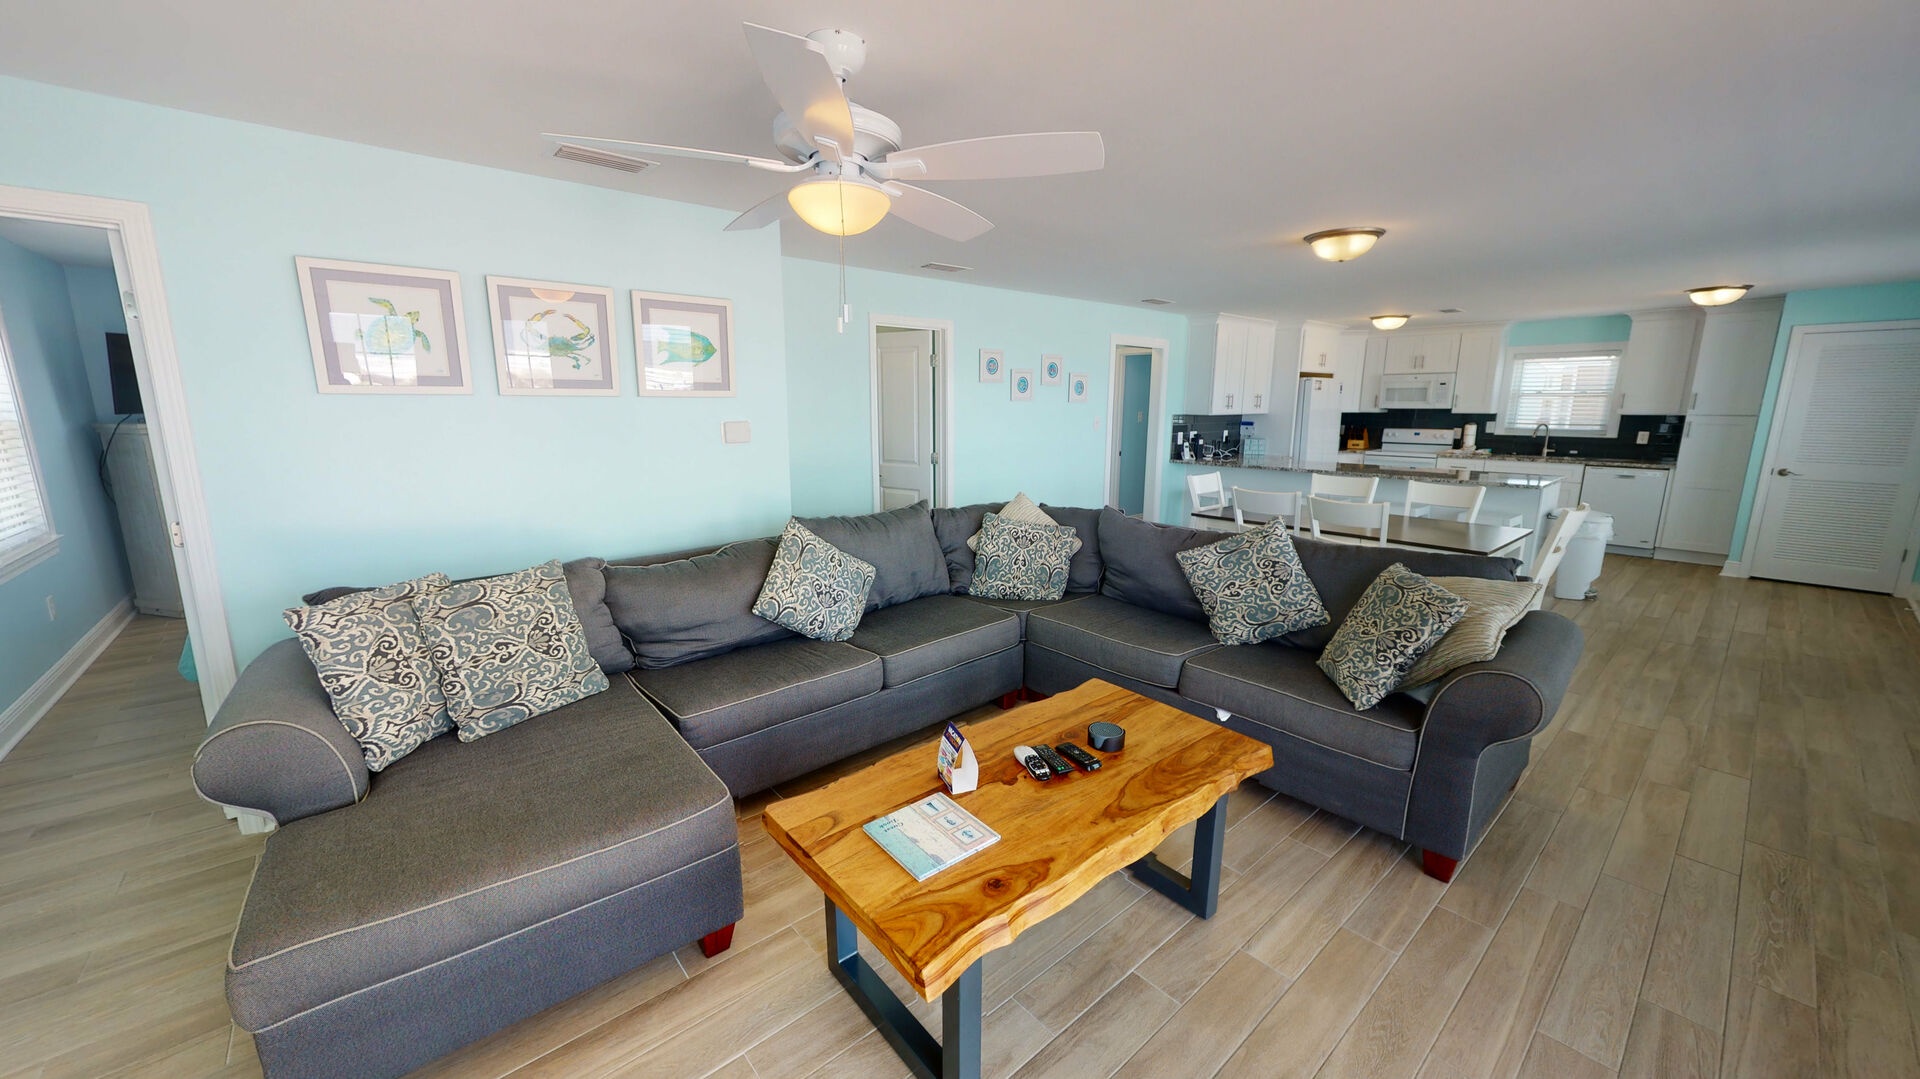 Living area features a large sectional that also doubles as a sofa sleeper for 2, TV, and access to the beach front deck